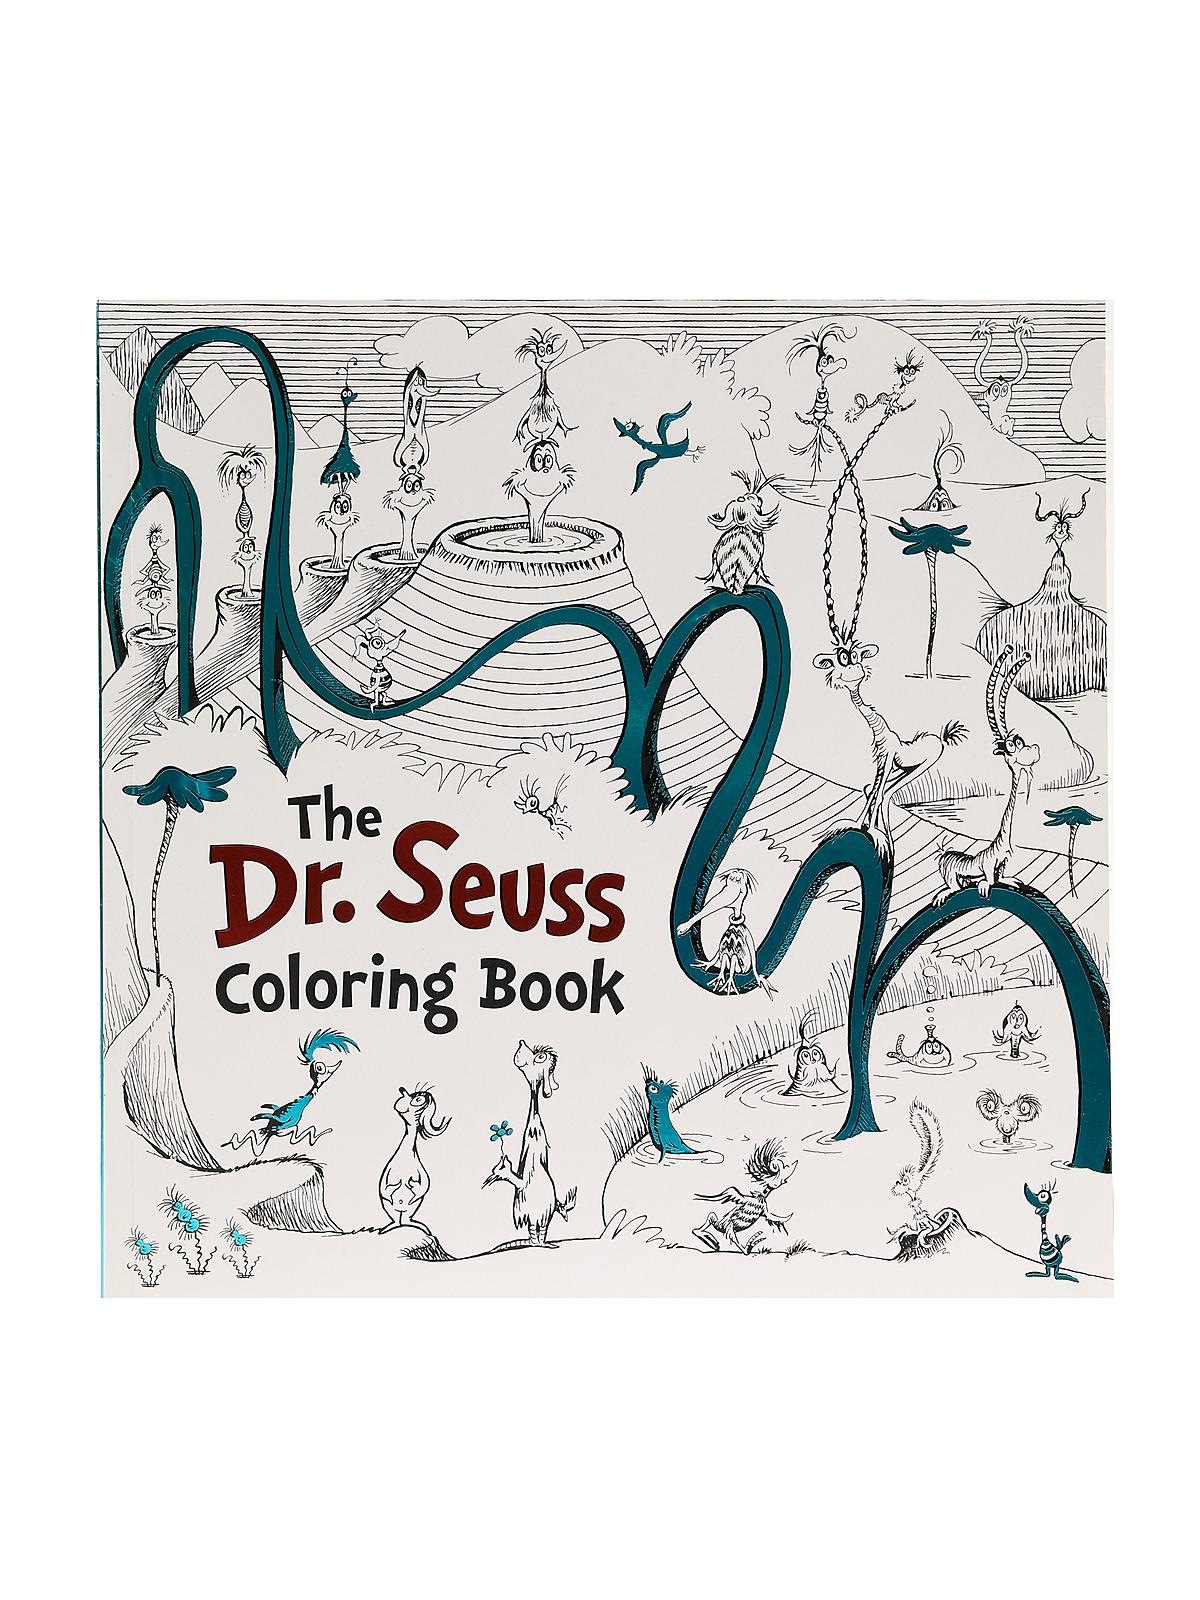 Dr. Suess Coloring Book Each